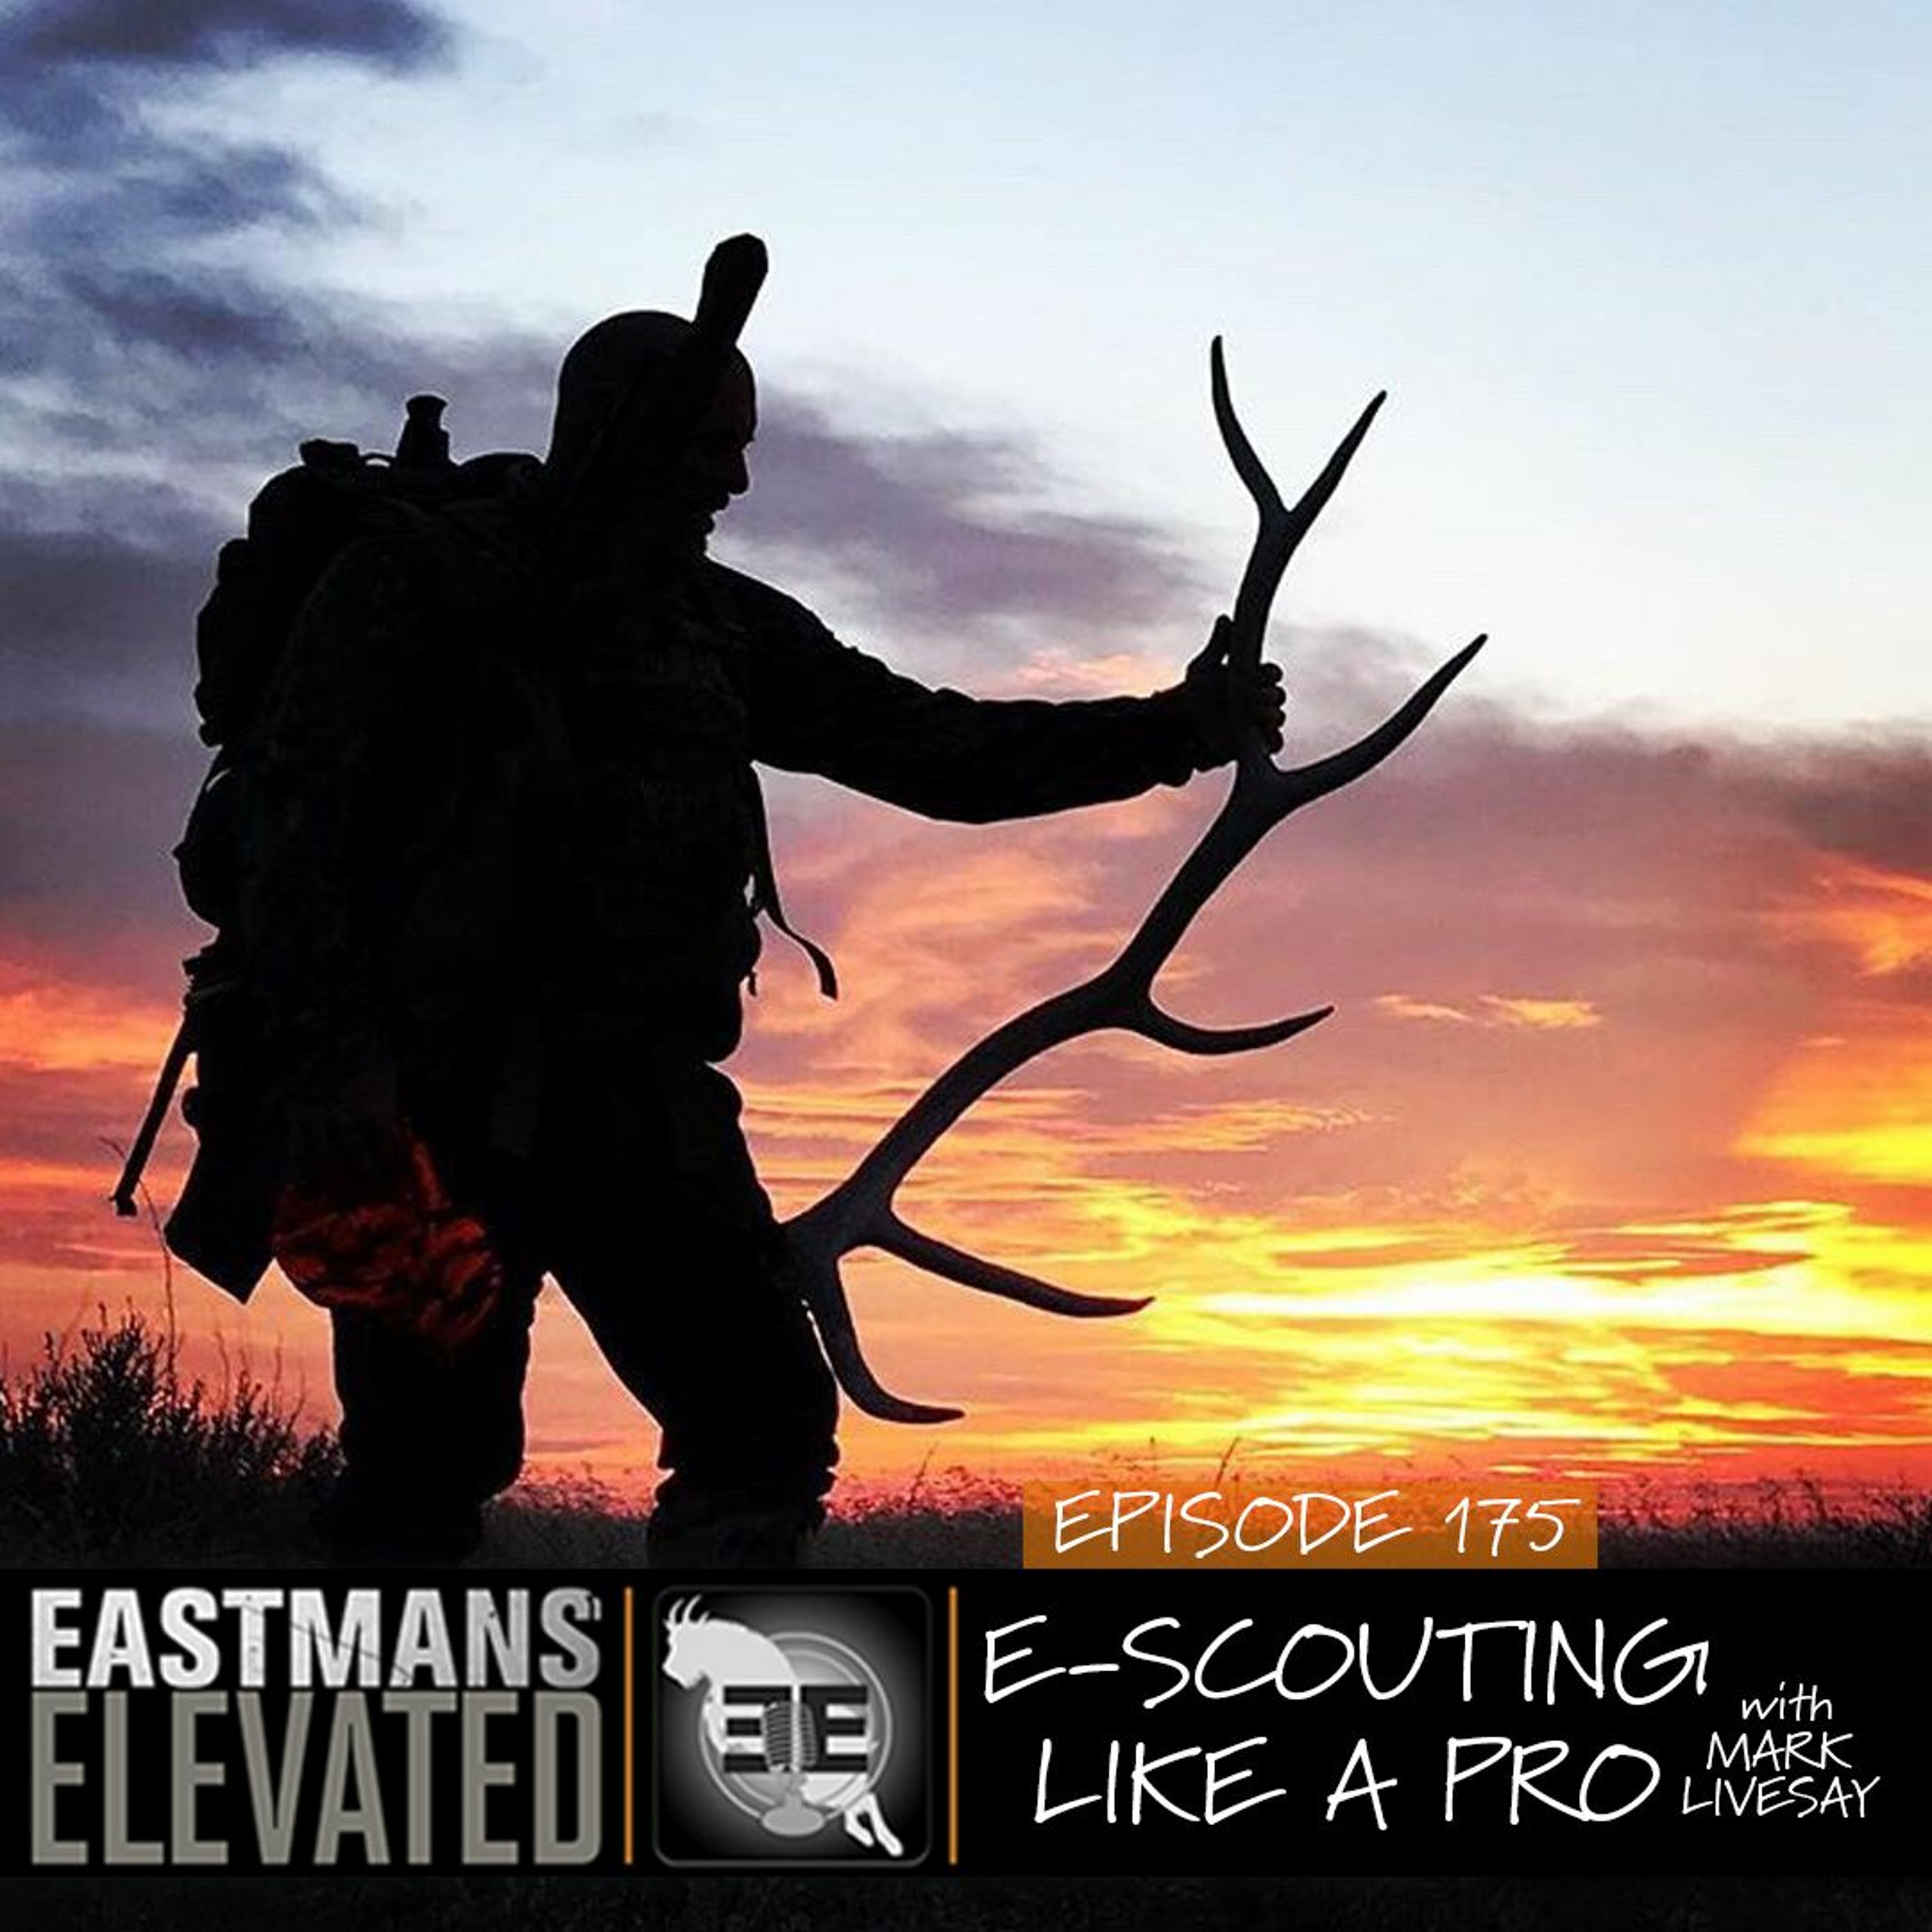 Episode 175: E-Scouting Like a Pro with Mark Livesay